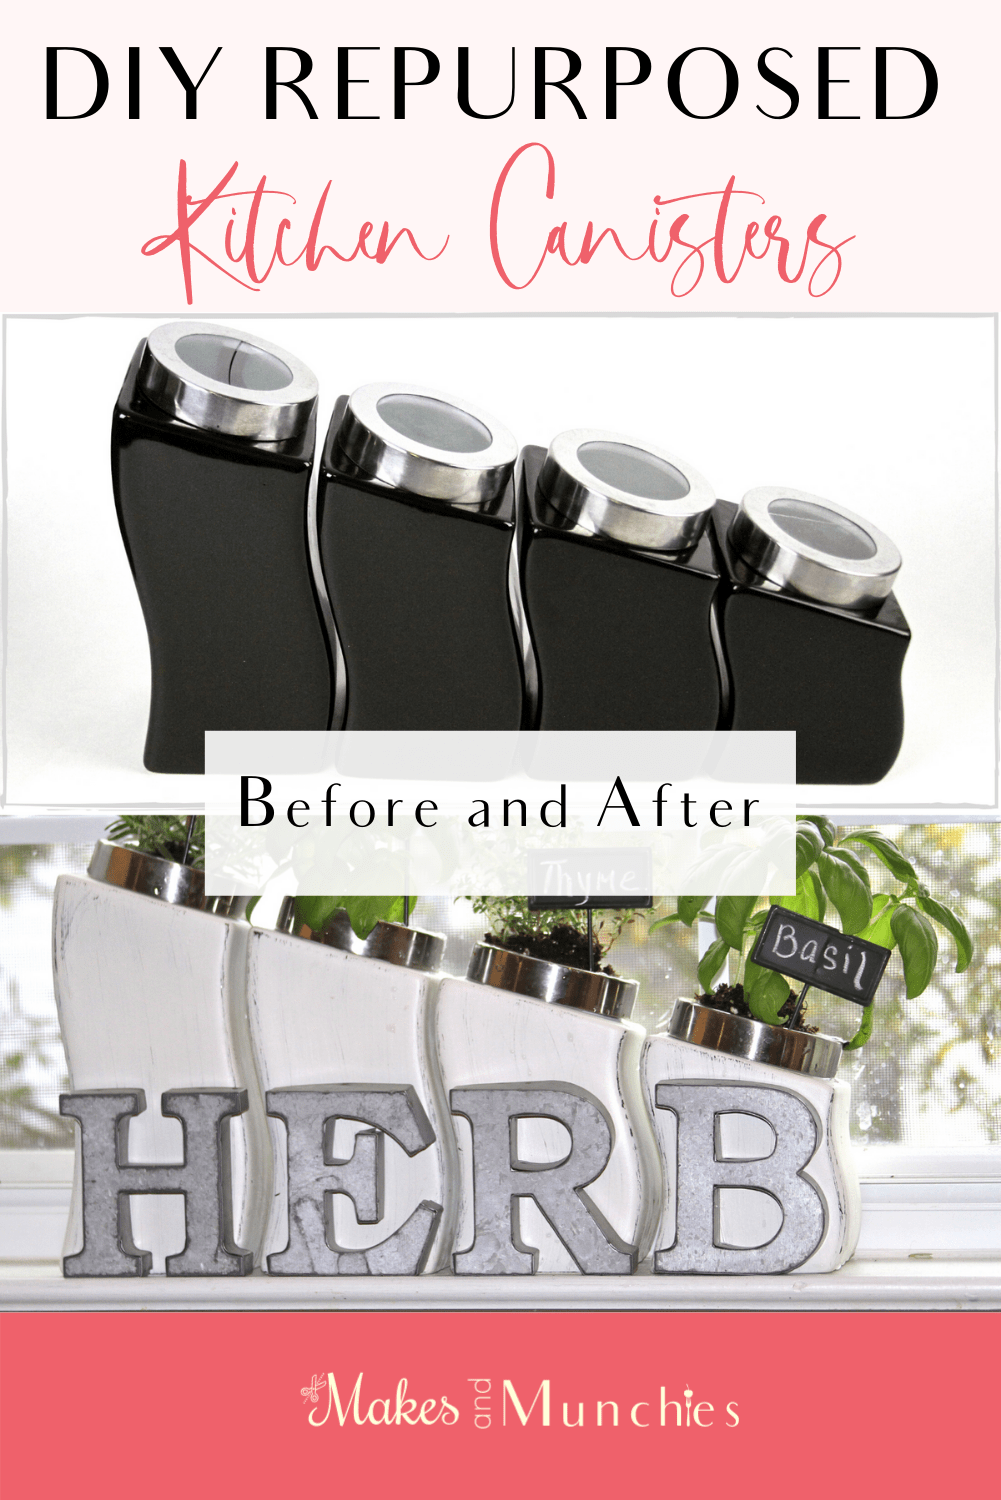 DIY Repurposed Kitchen Canisters